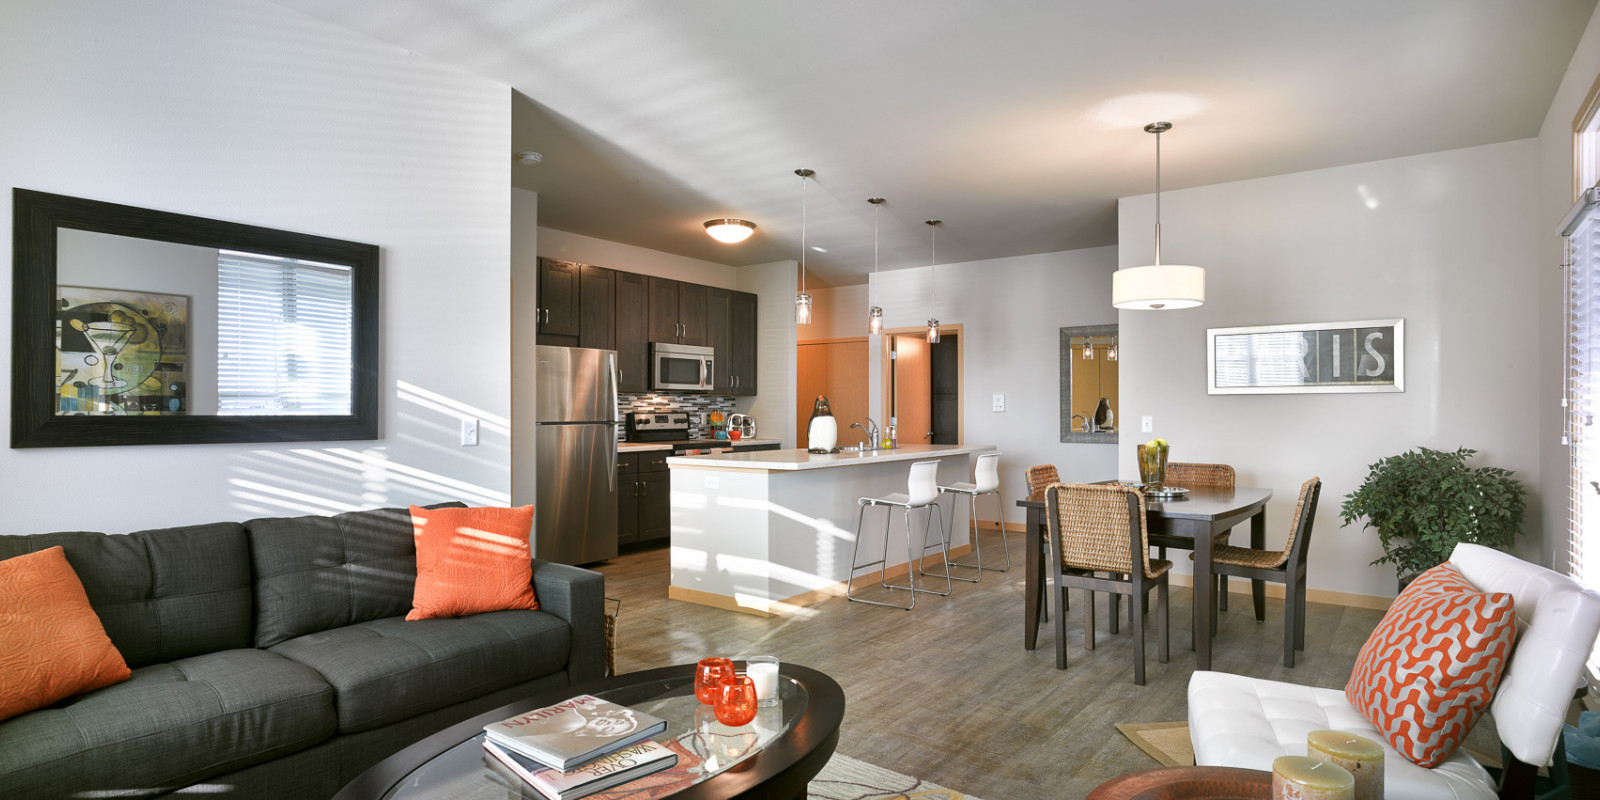 Turnberry Apartments open concept kitchen and dining area